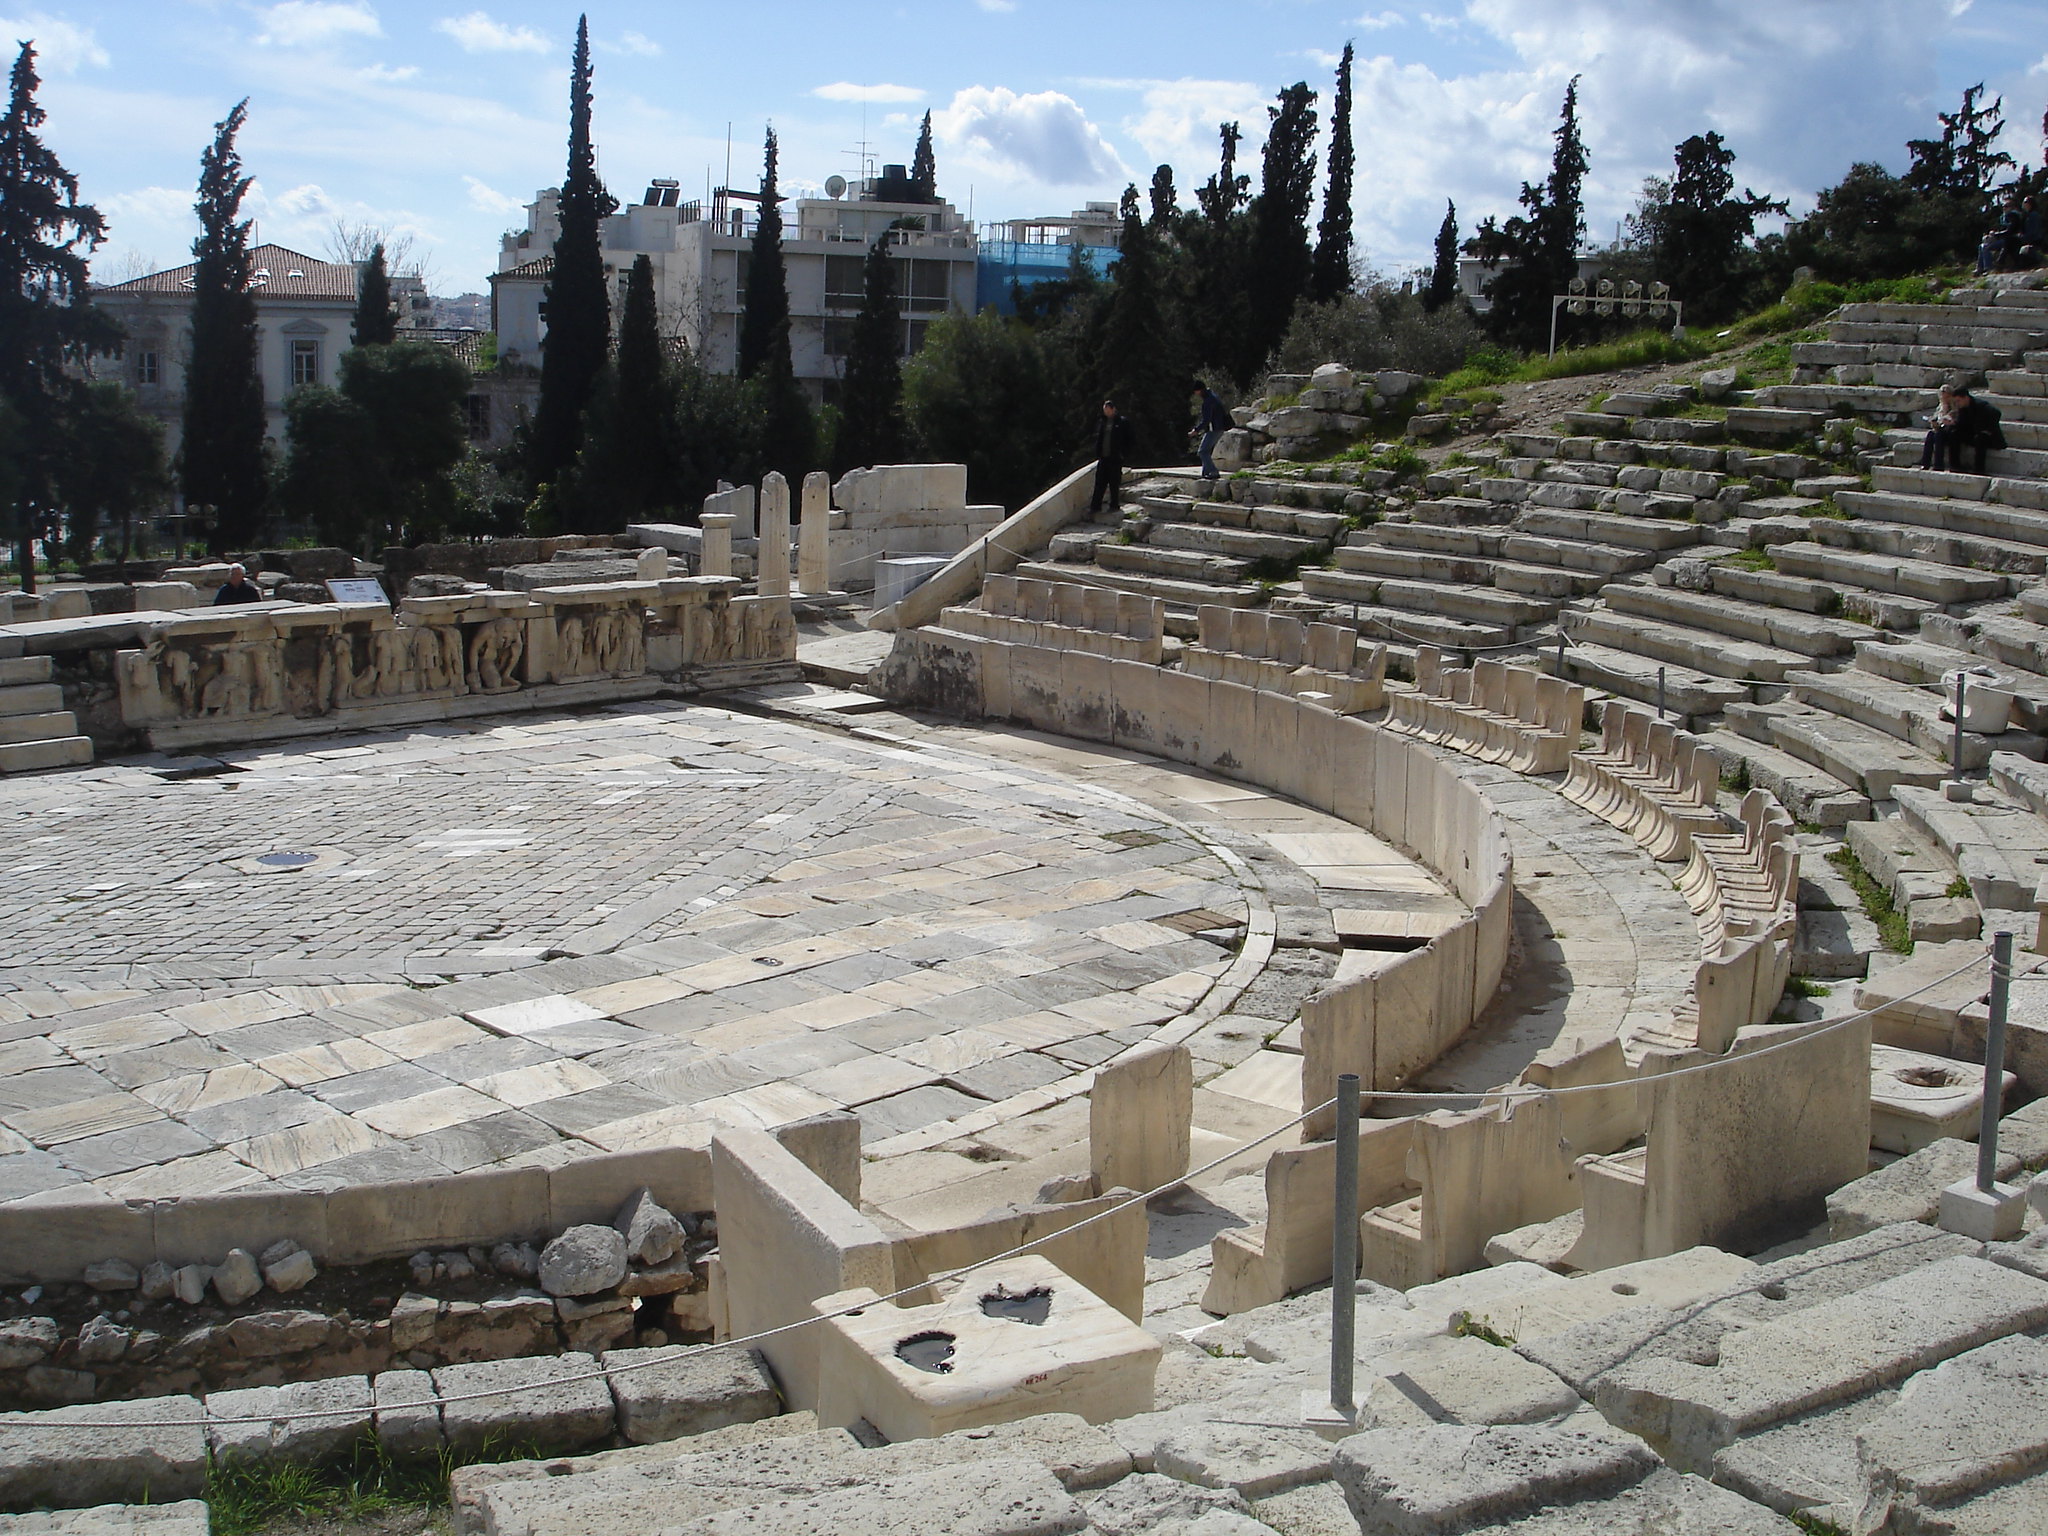 Theatre of Dionysus, one of the monuments of the Acropolis